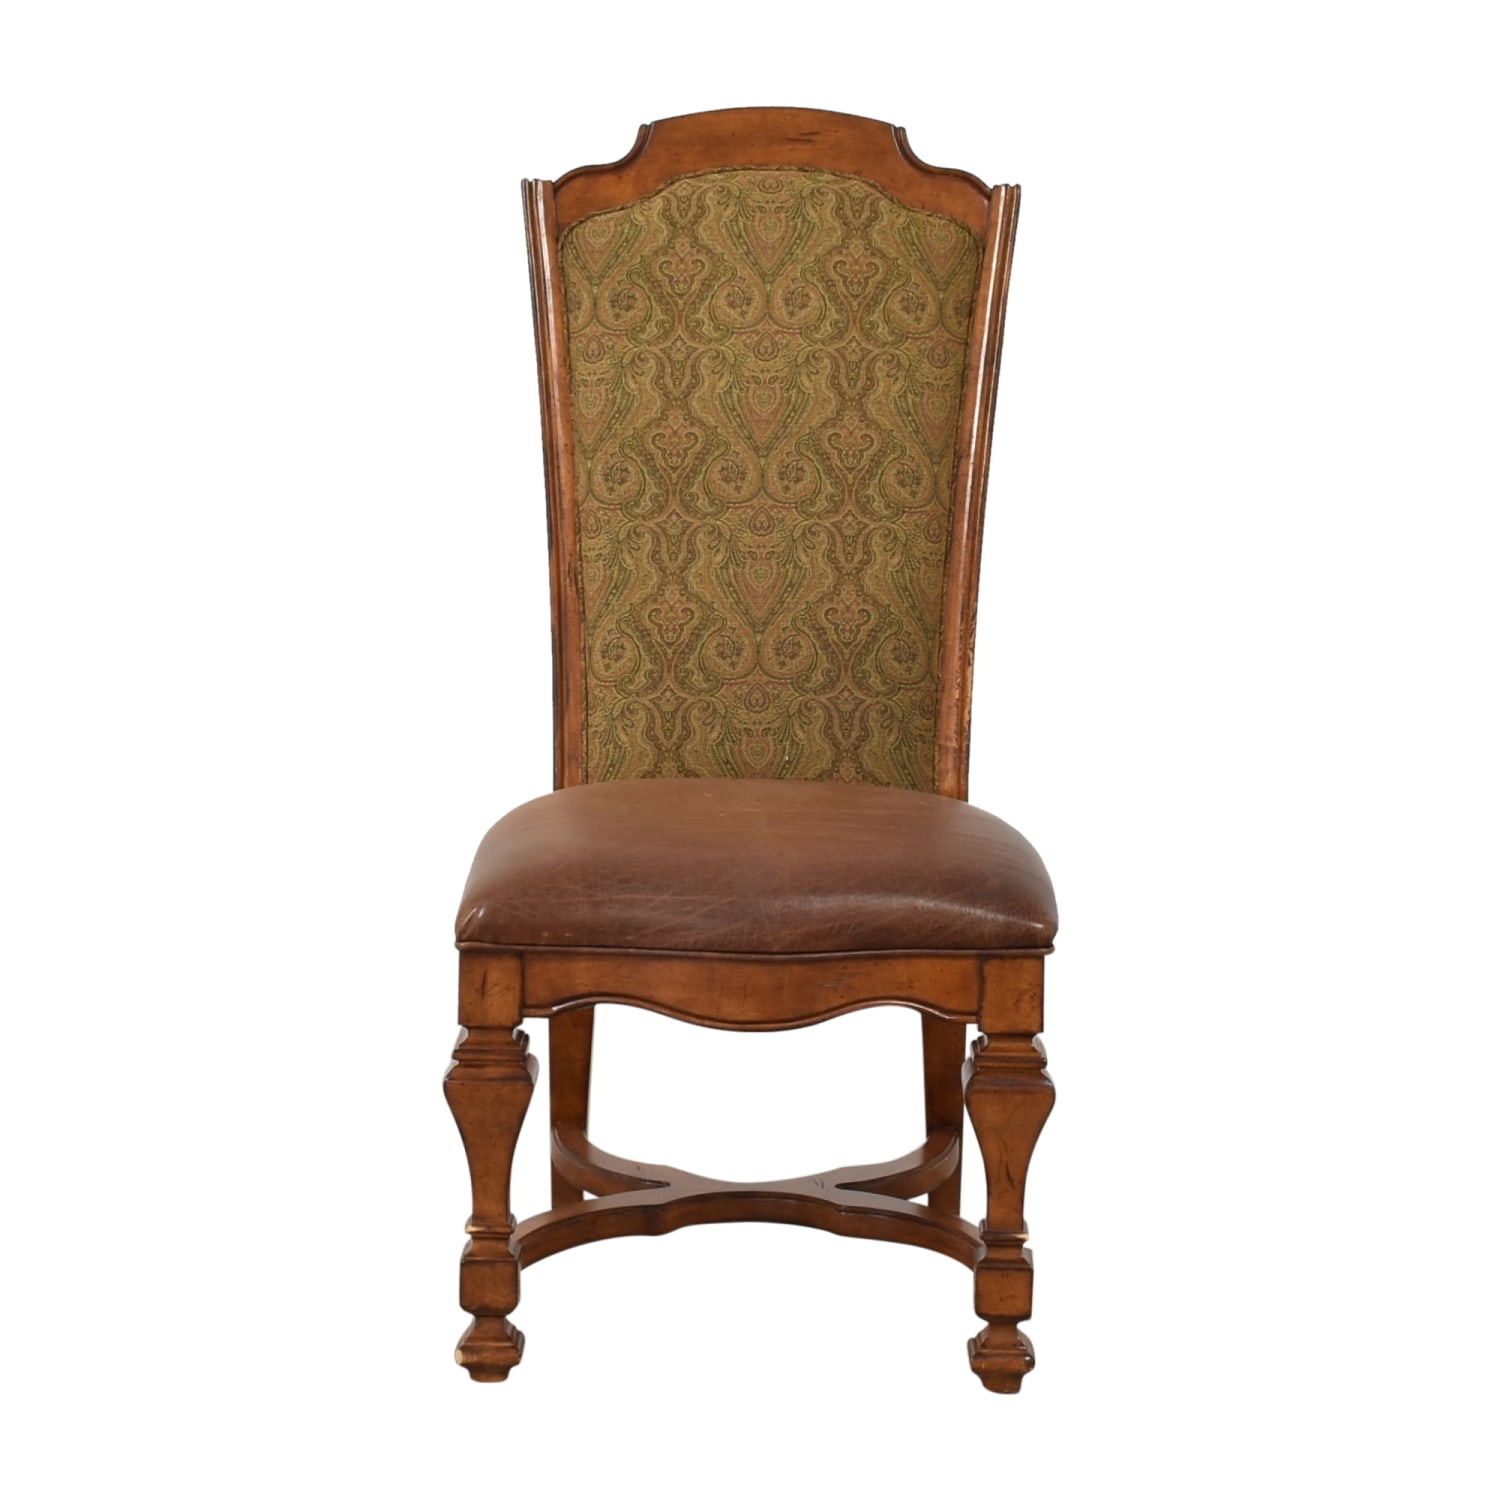 https://res.cloudinary.com/dkqtxtobb/image/upload/f_auto,q_auto:best,w_1500/product-assets/203398/stanley-furniture/chairs/dining-chairs/stanley-furniture-upholstered-dining-side-chair.jpeg